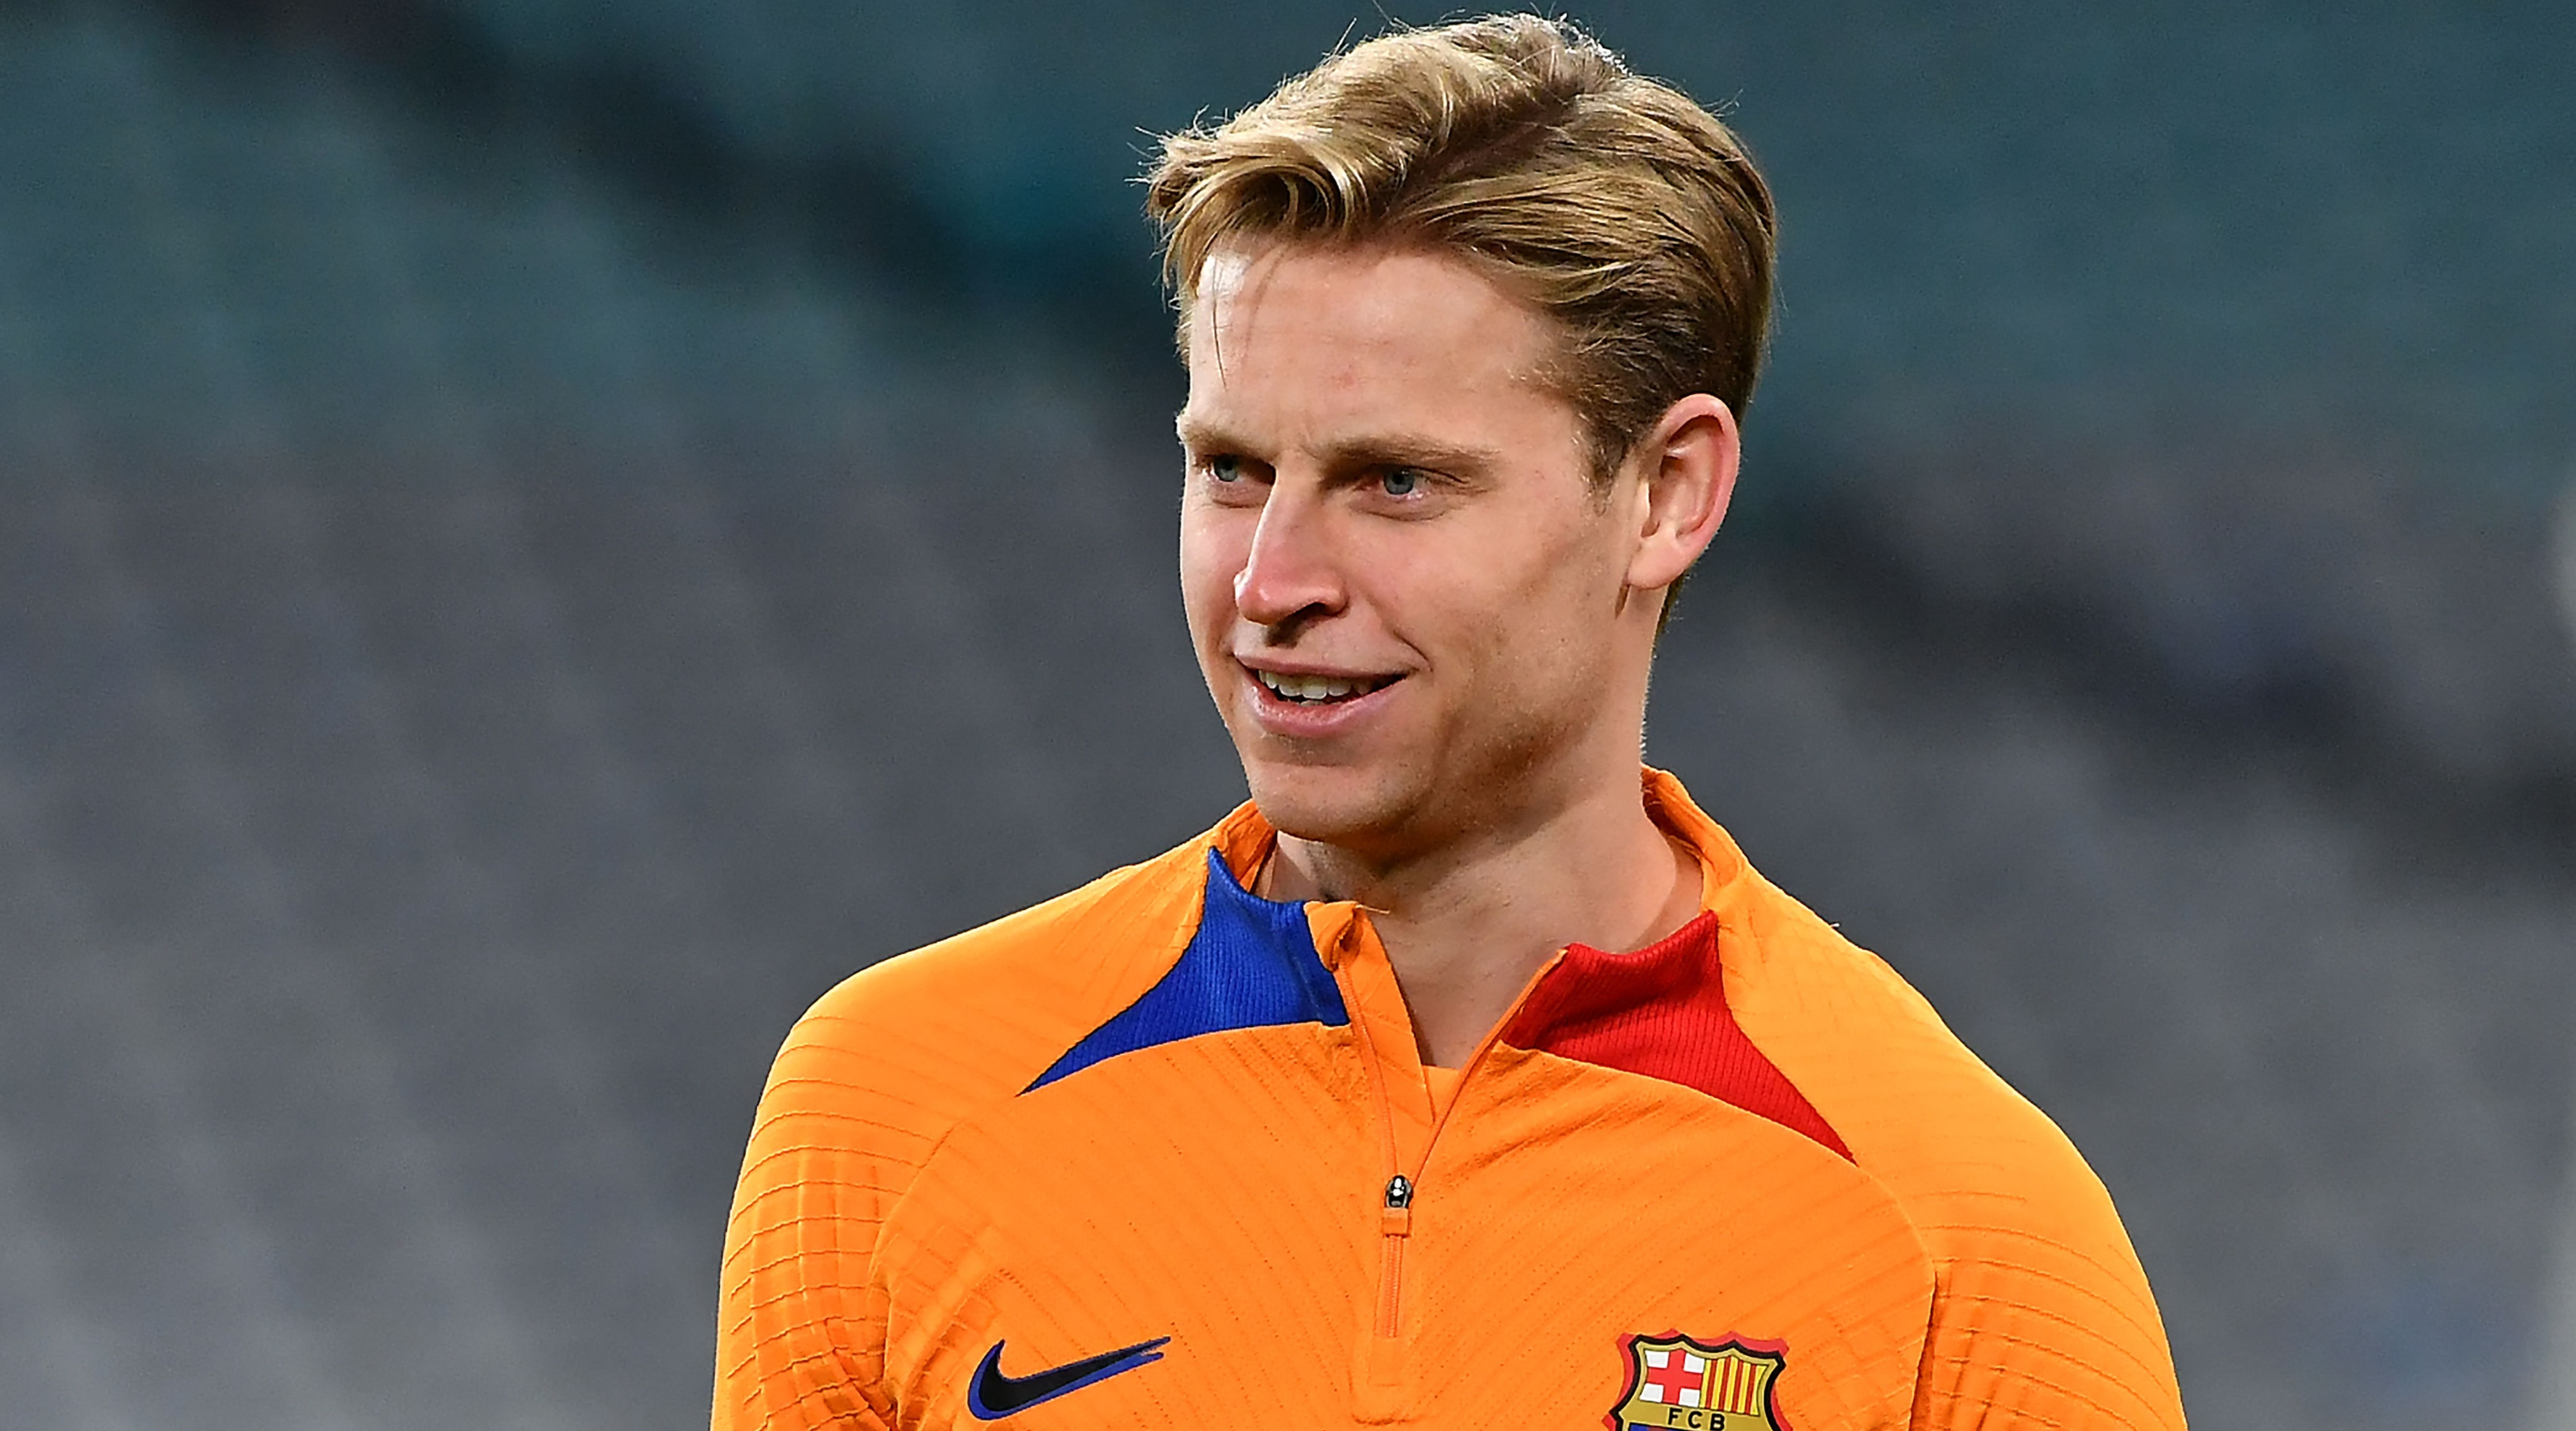 FC Barcelona's Frenkie De Jong looks on during a training session at the Accor Stadium in Sydney on May 24, 2022, ahead of a friendly football match between FC Barcelona and A-League All Stars.